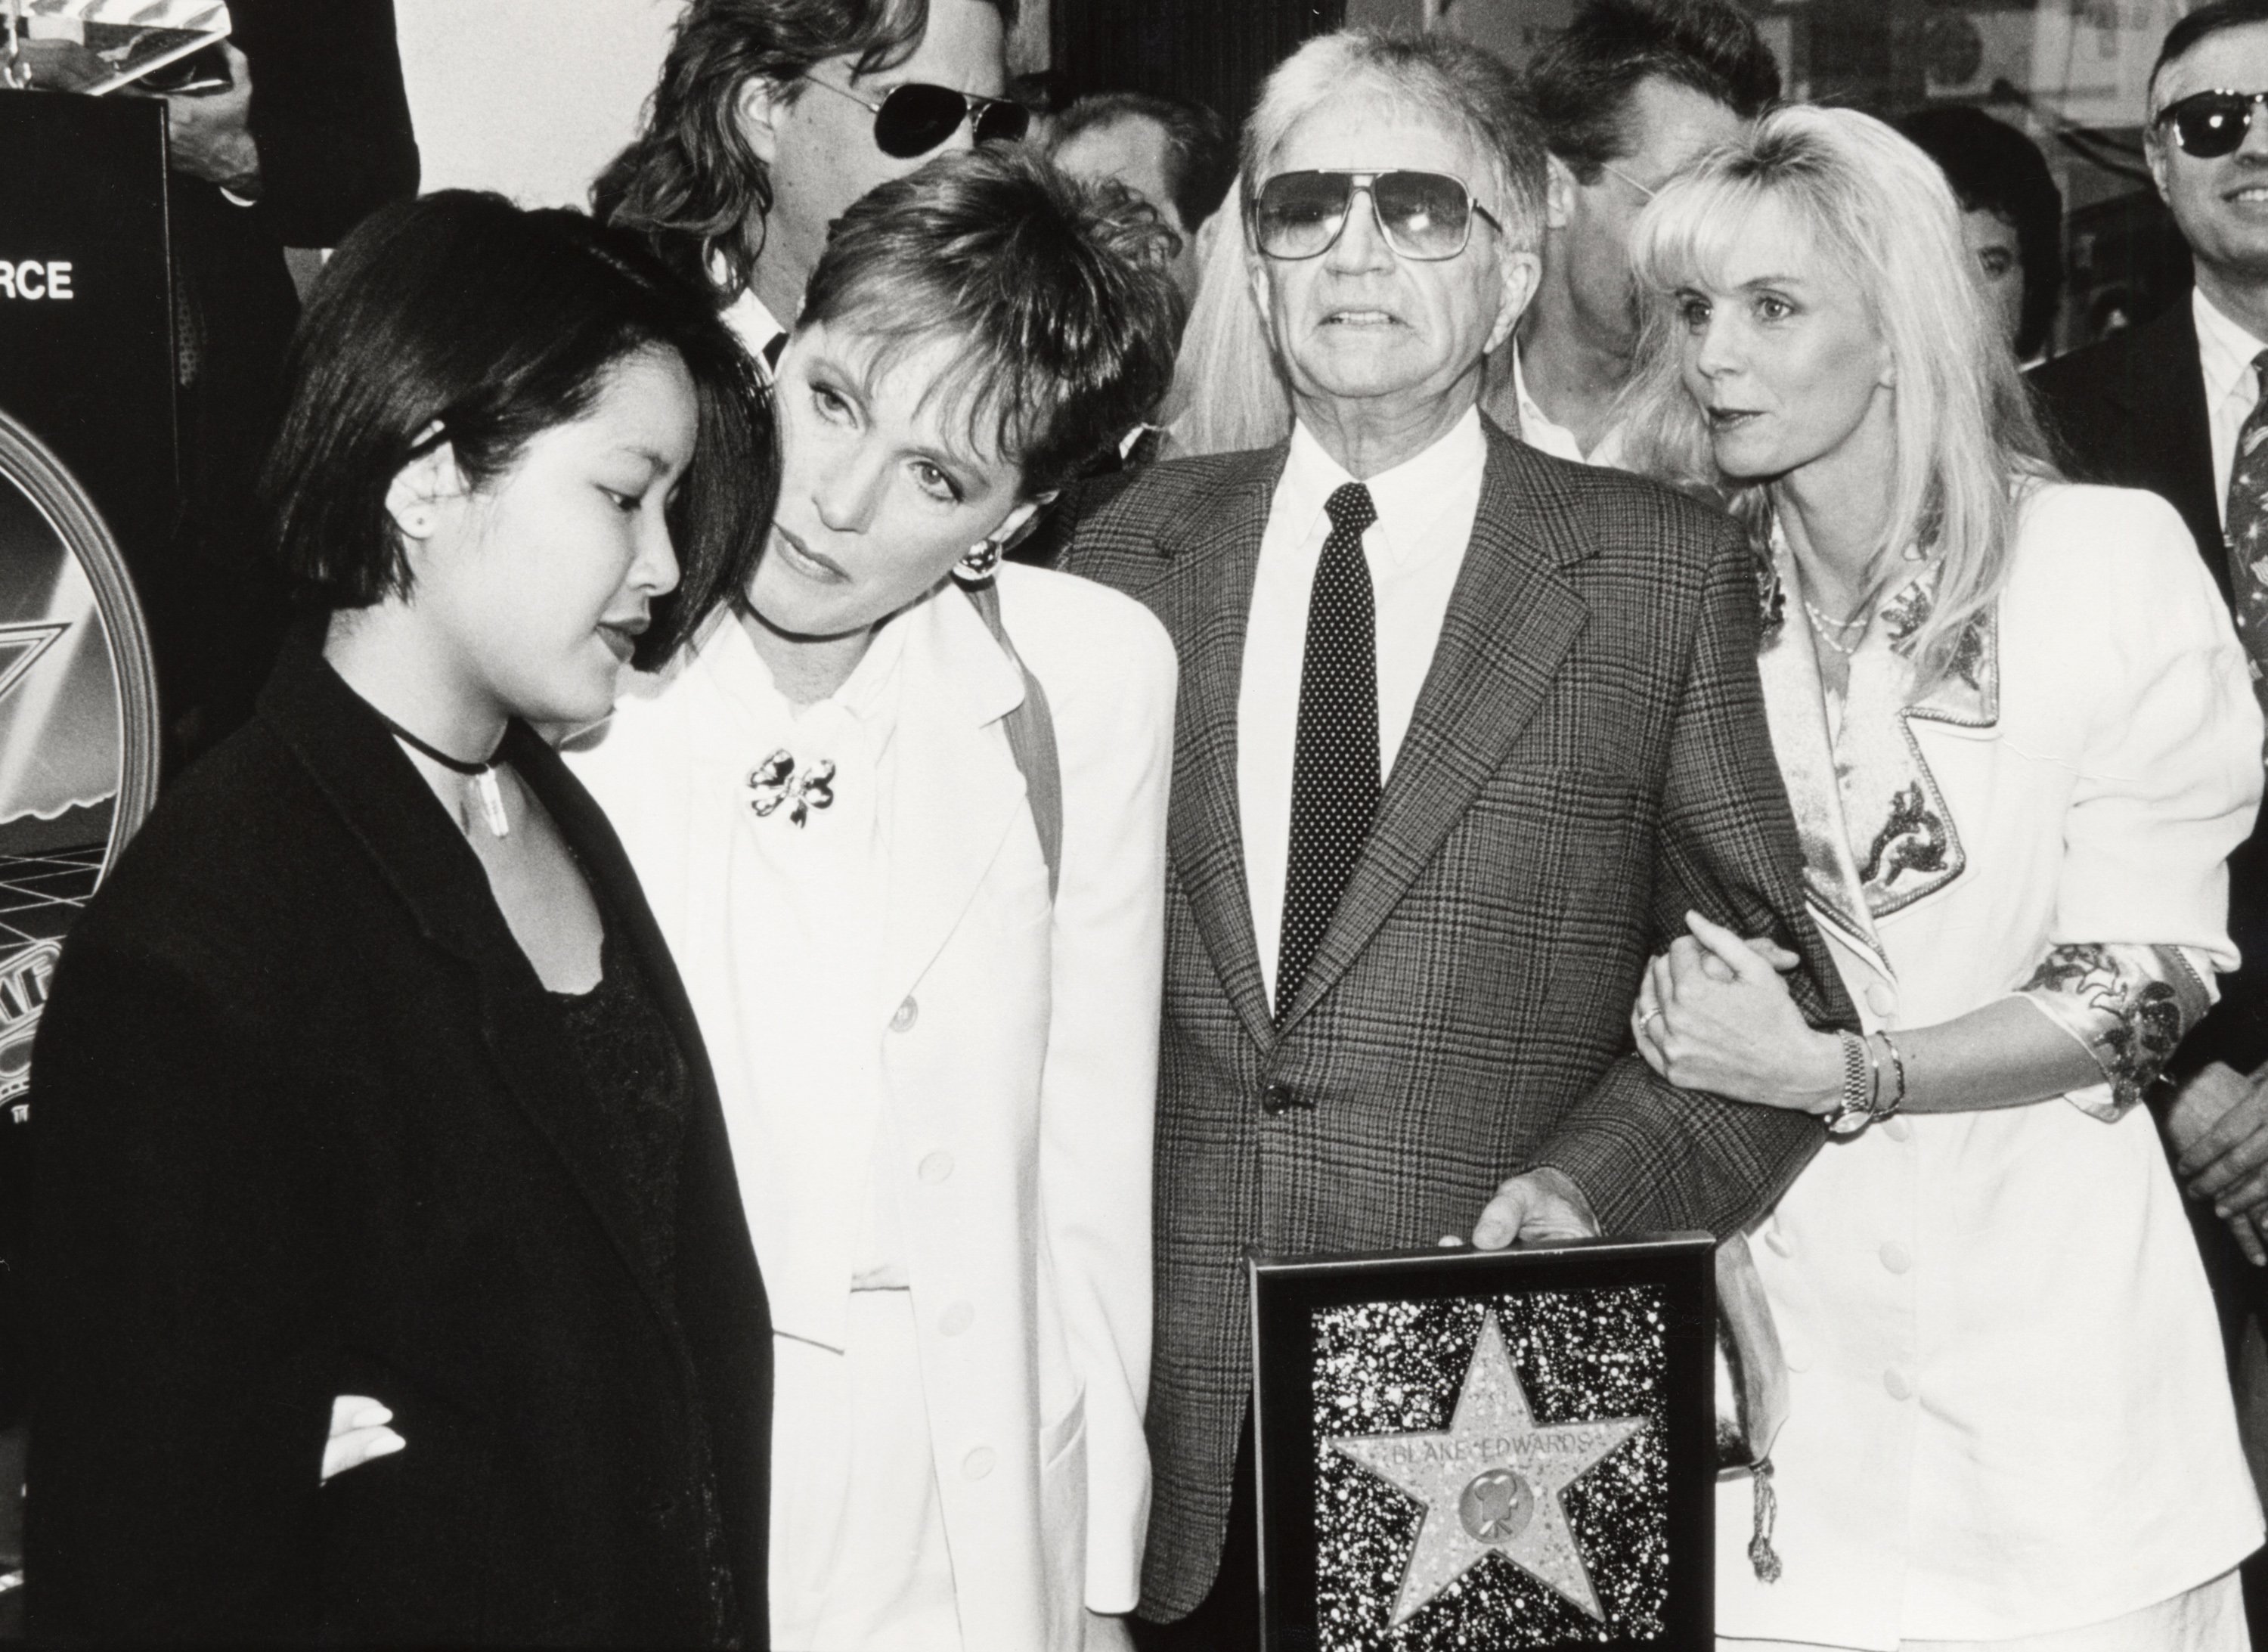 Amy Edwards, Julie Andrews, Blake Edwards, and Jennifer Edwards at a ceremony honoring Blake with a Star on the Hollywood Walk of Fame on April 3, 1991. | Source: Jim Smeal/Ron Galella Collection/Getty Images